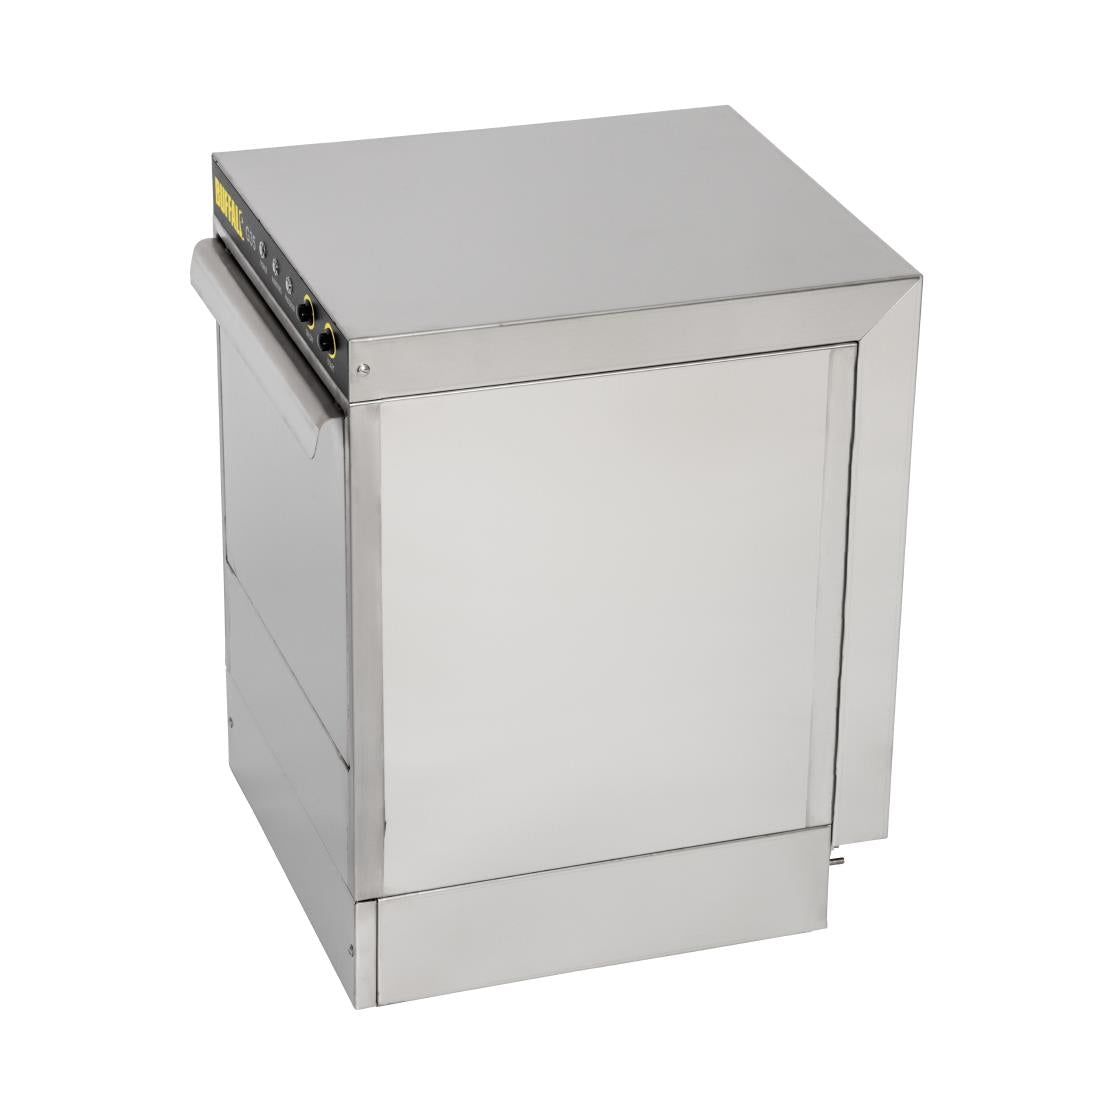 Buffalo Compact Glasswasher DW464 JD Catering Equipment Solutions Ltd